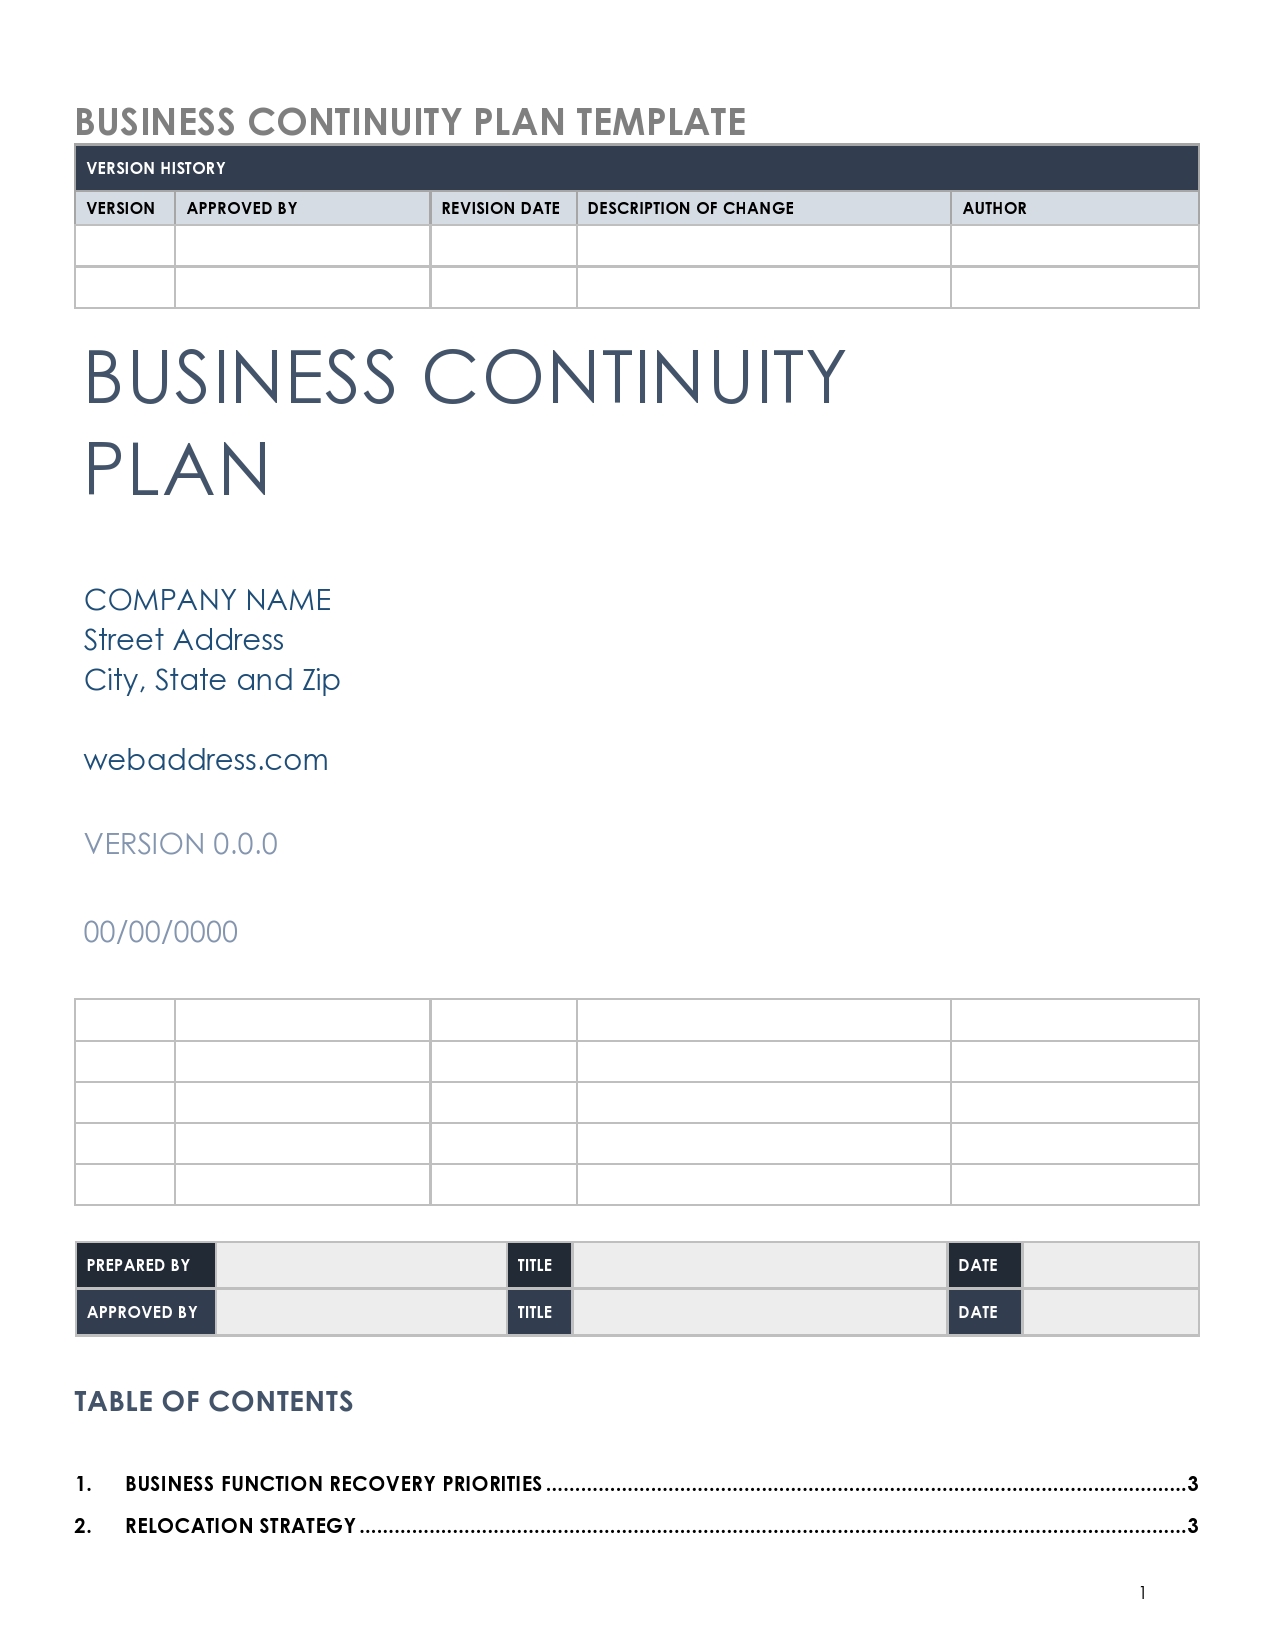 Free business continuity plan template 05